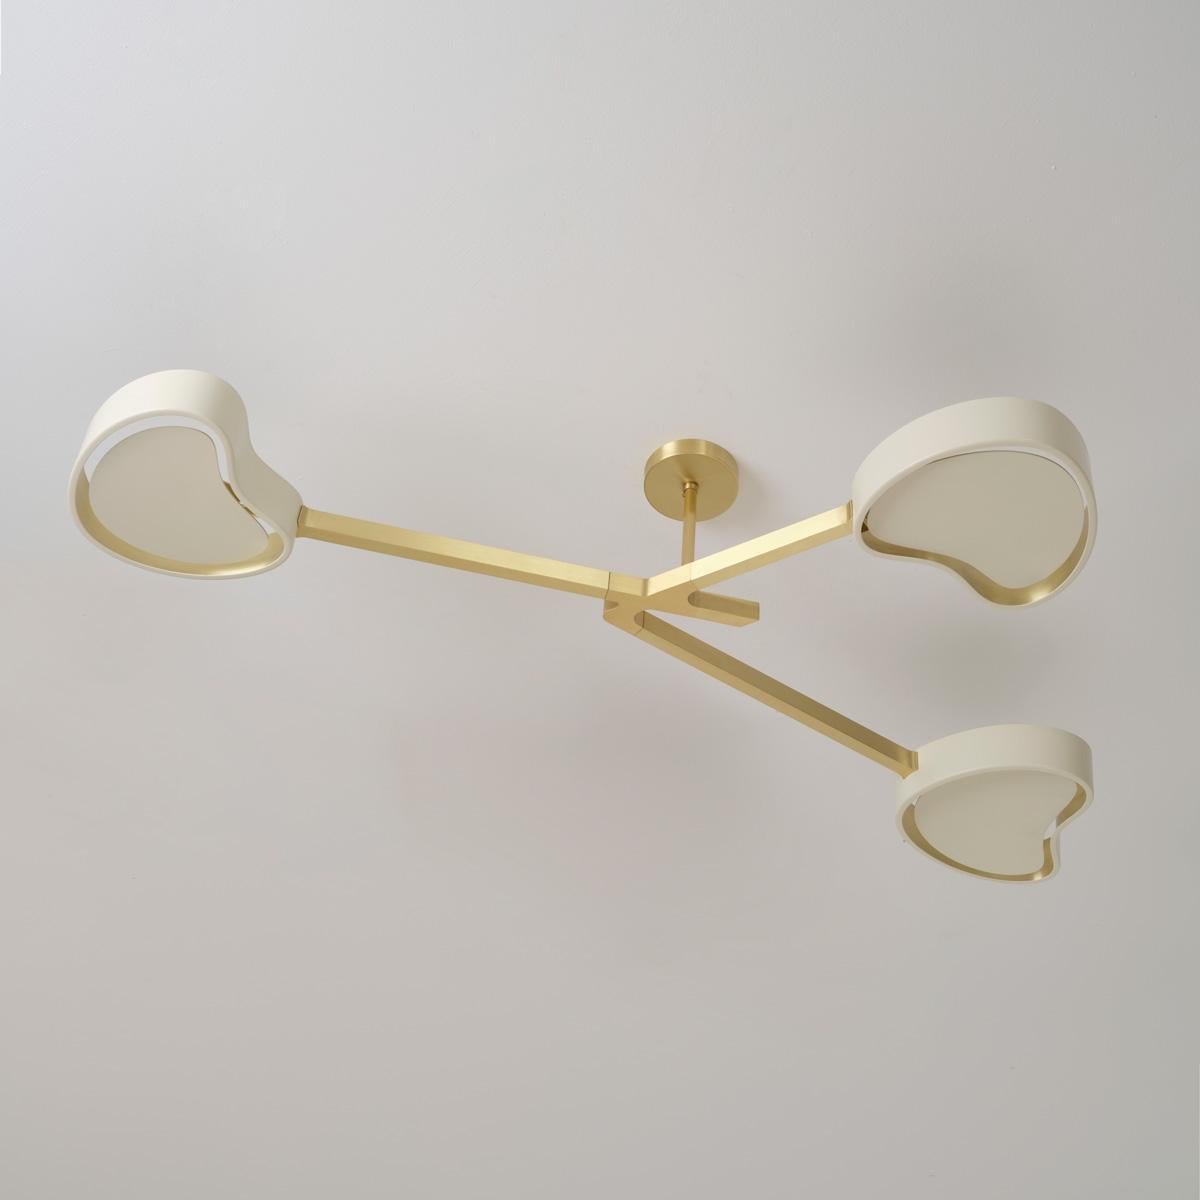 Contemporary Cuore N.3 Ceiling Light by Gaspare Asaro. Bronze Finish For Sale